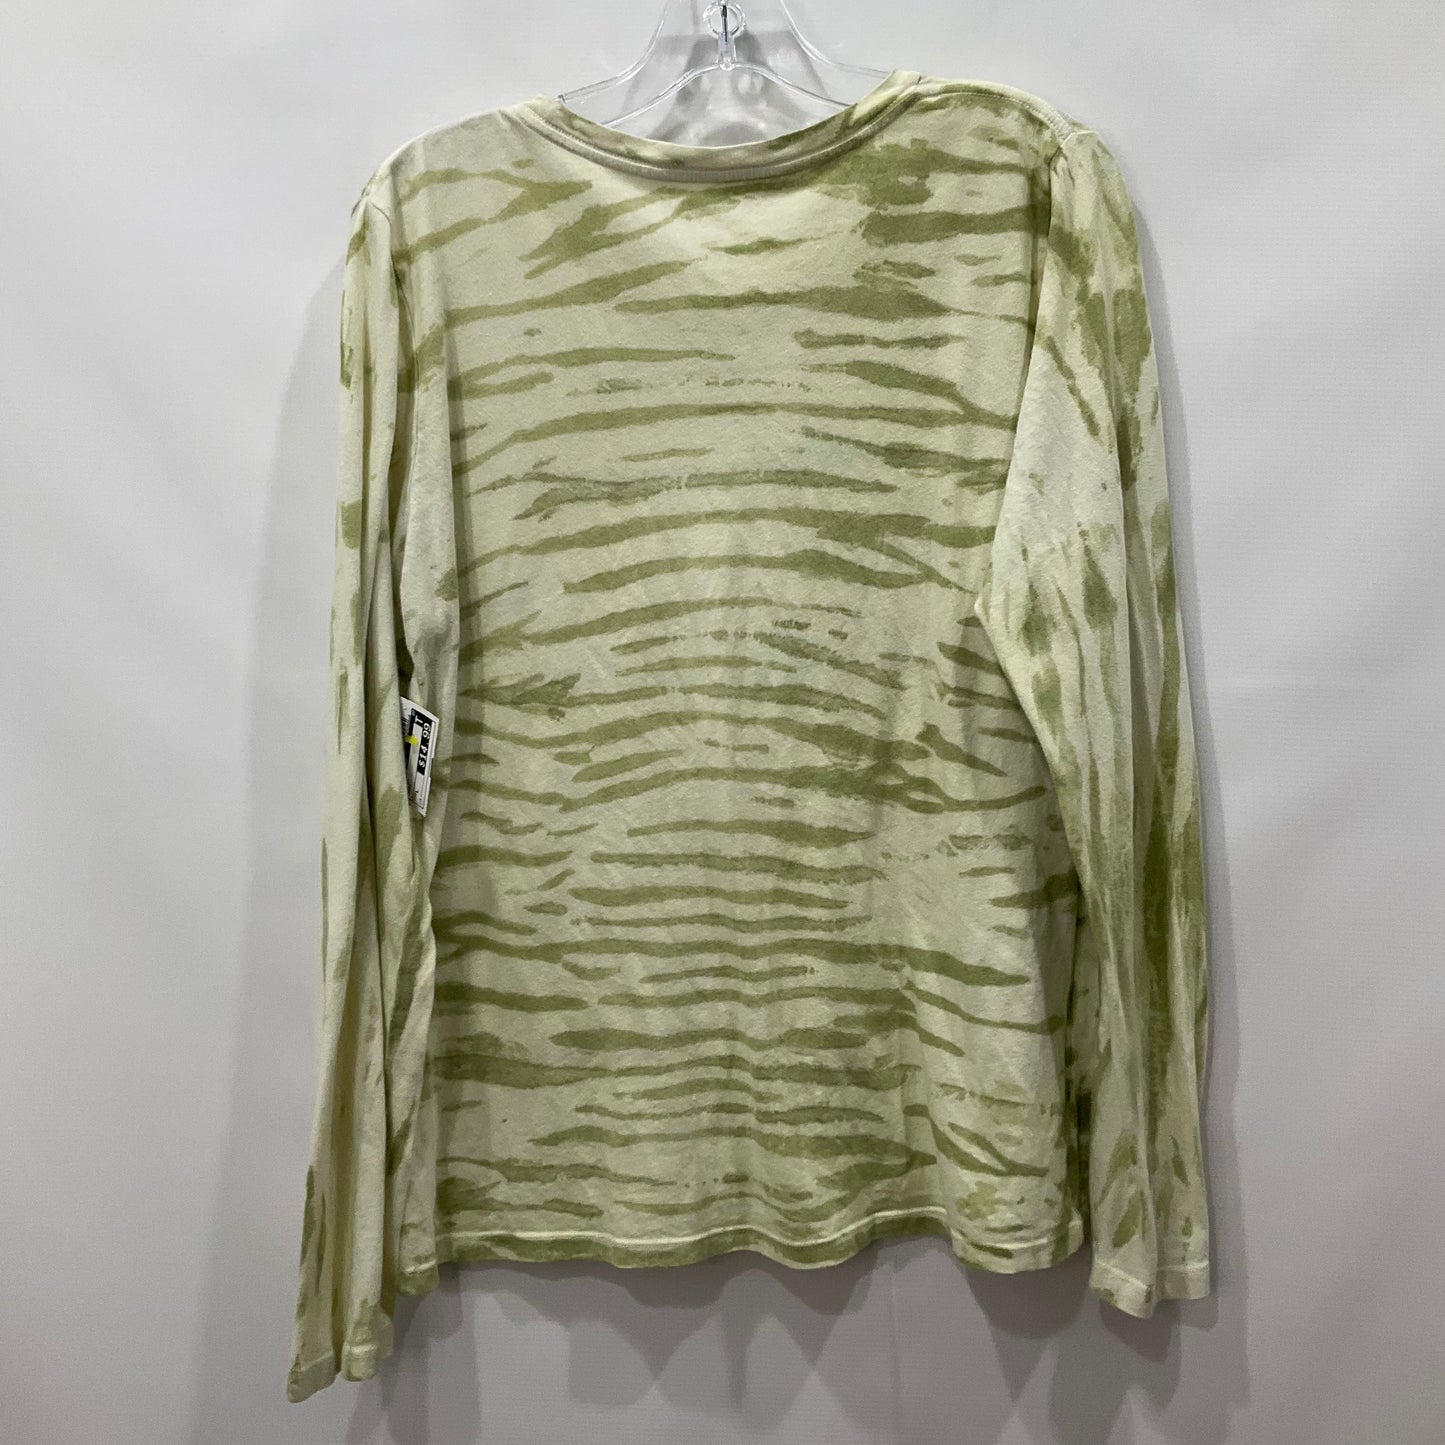 Top Long Sleeve By Reformation  Size: L